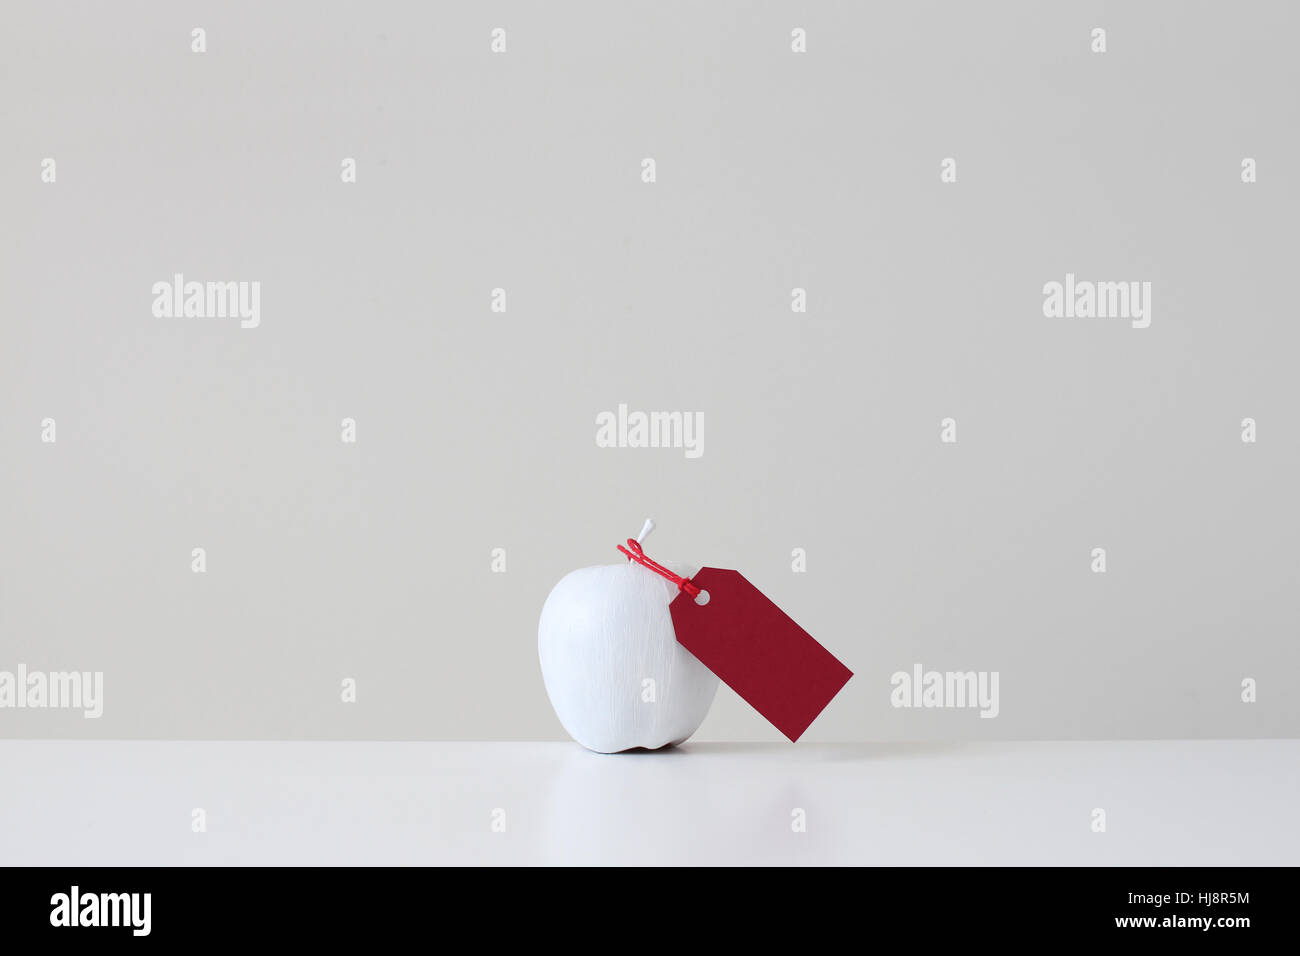 White painted apple with red tag Stock Photo